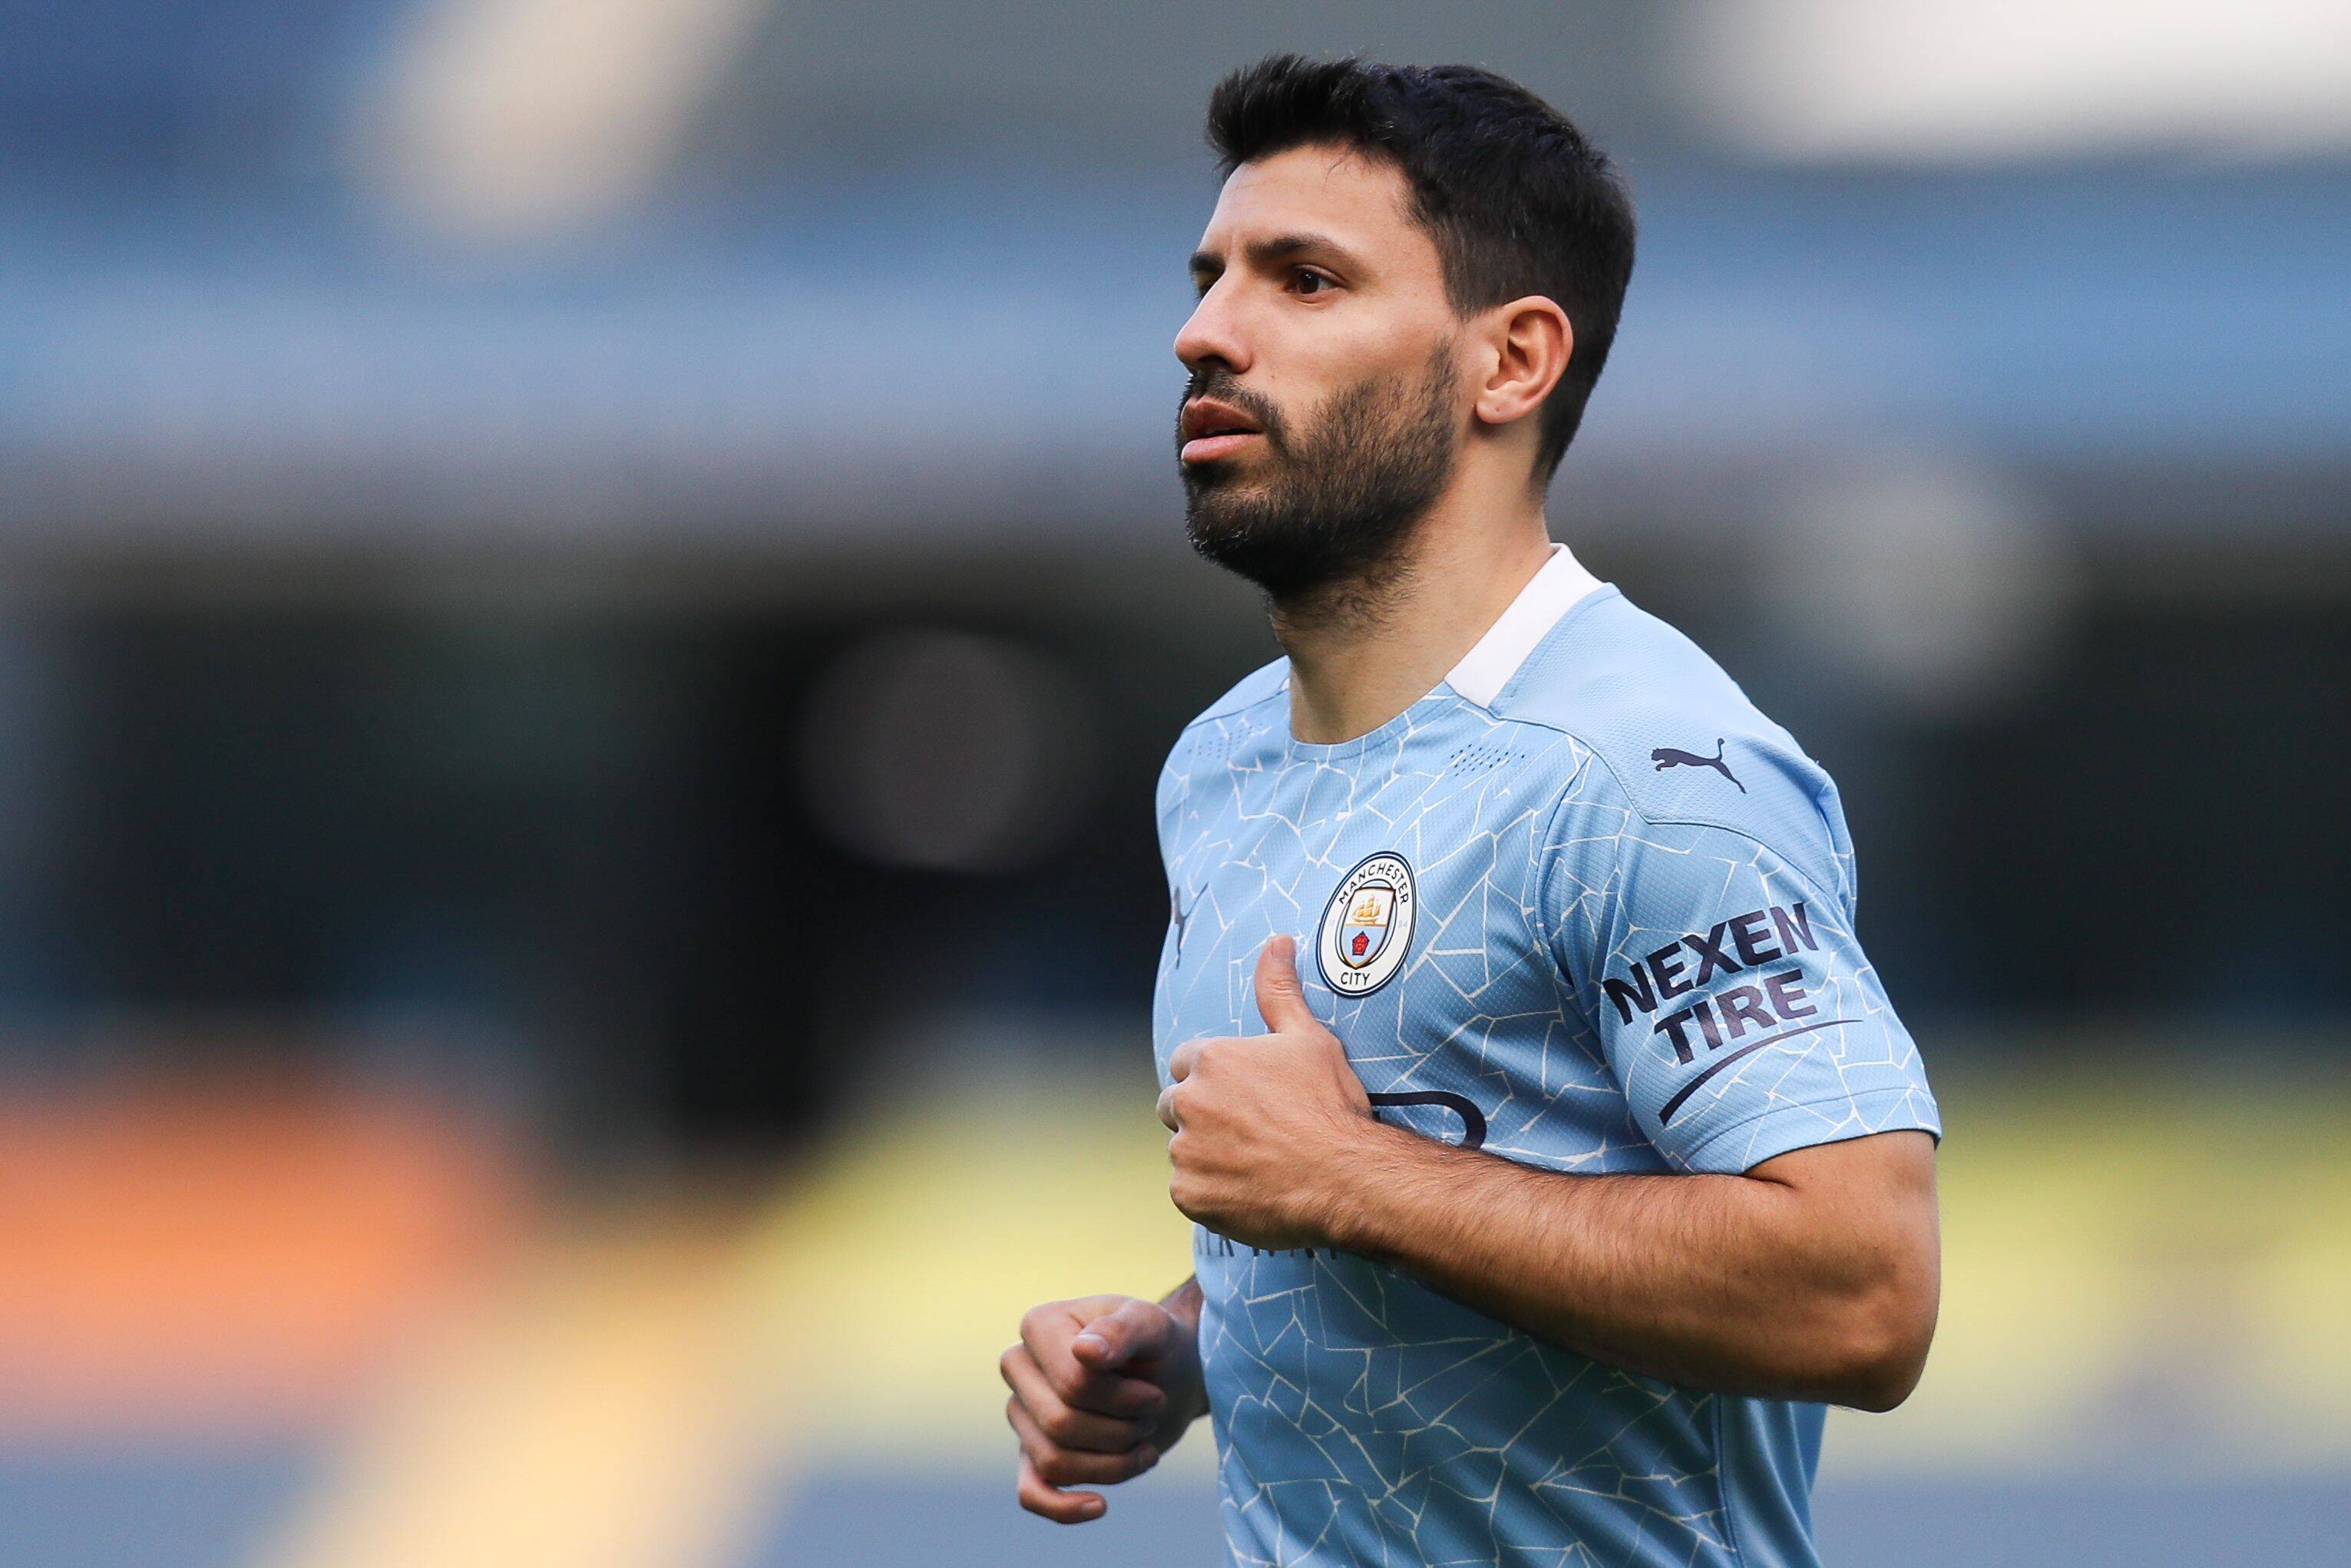 Man City debut Aguero-inspired training kit in tribute to former